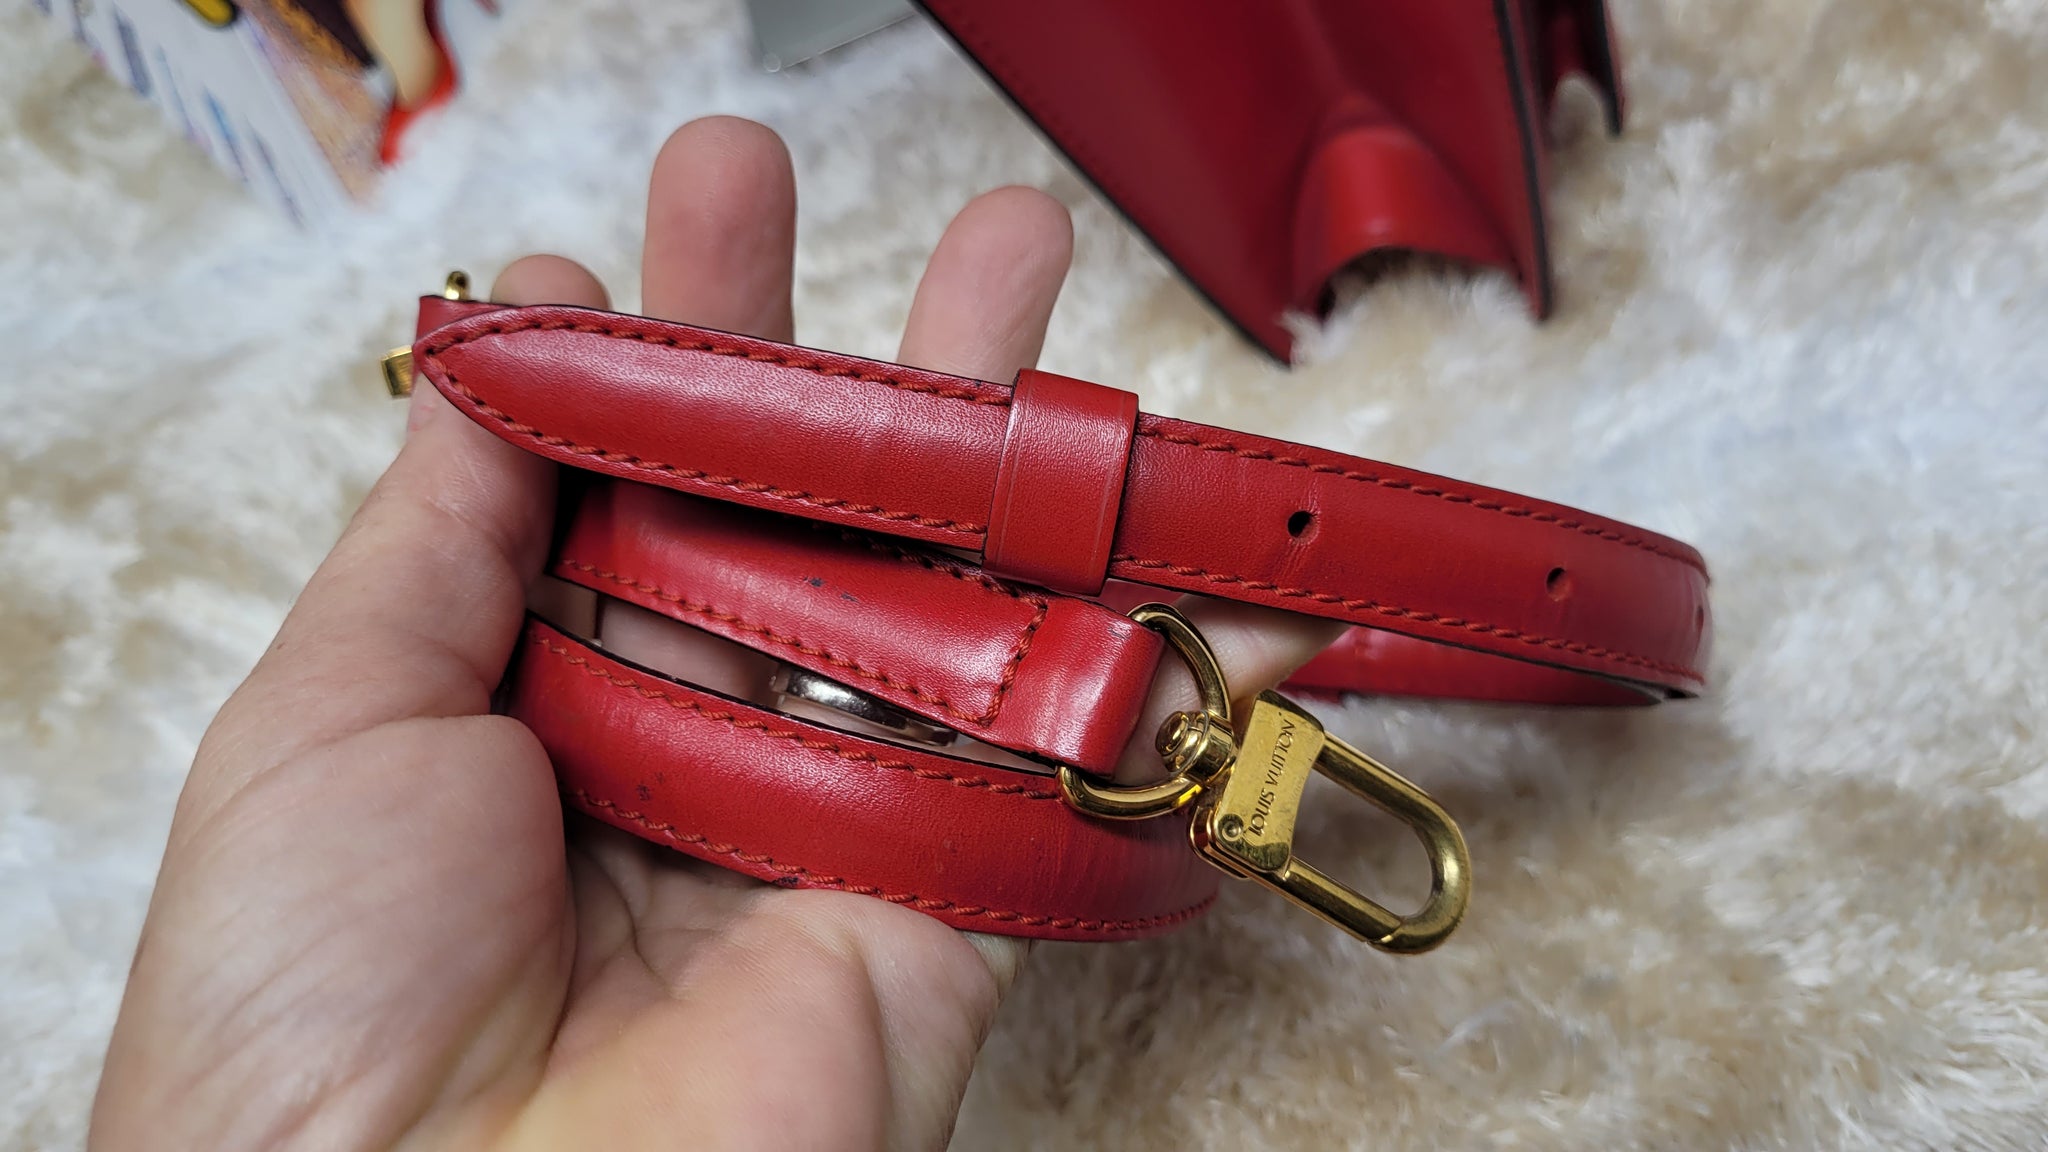 Louis Vuitton Crossbody With Red Strap